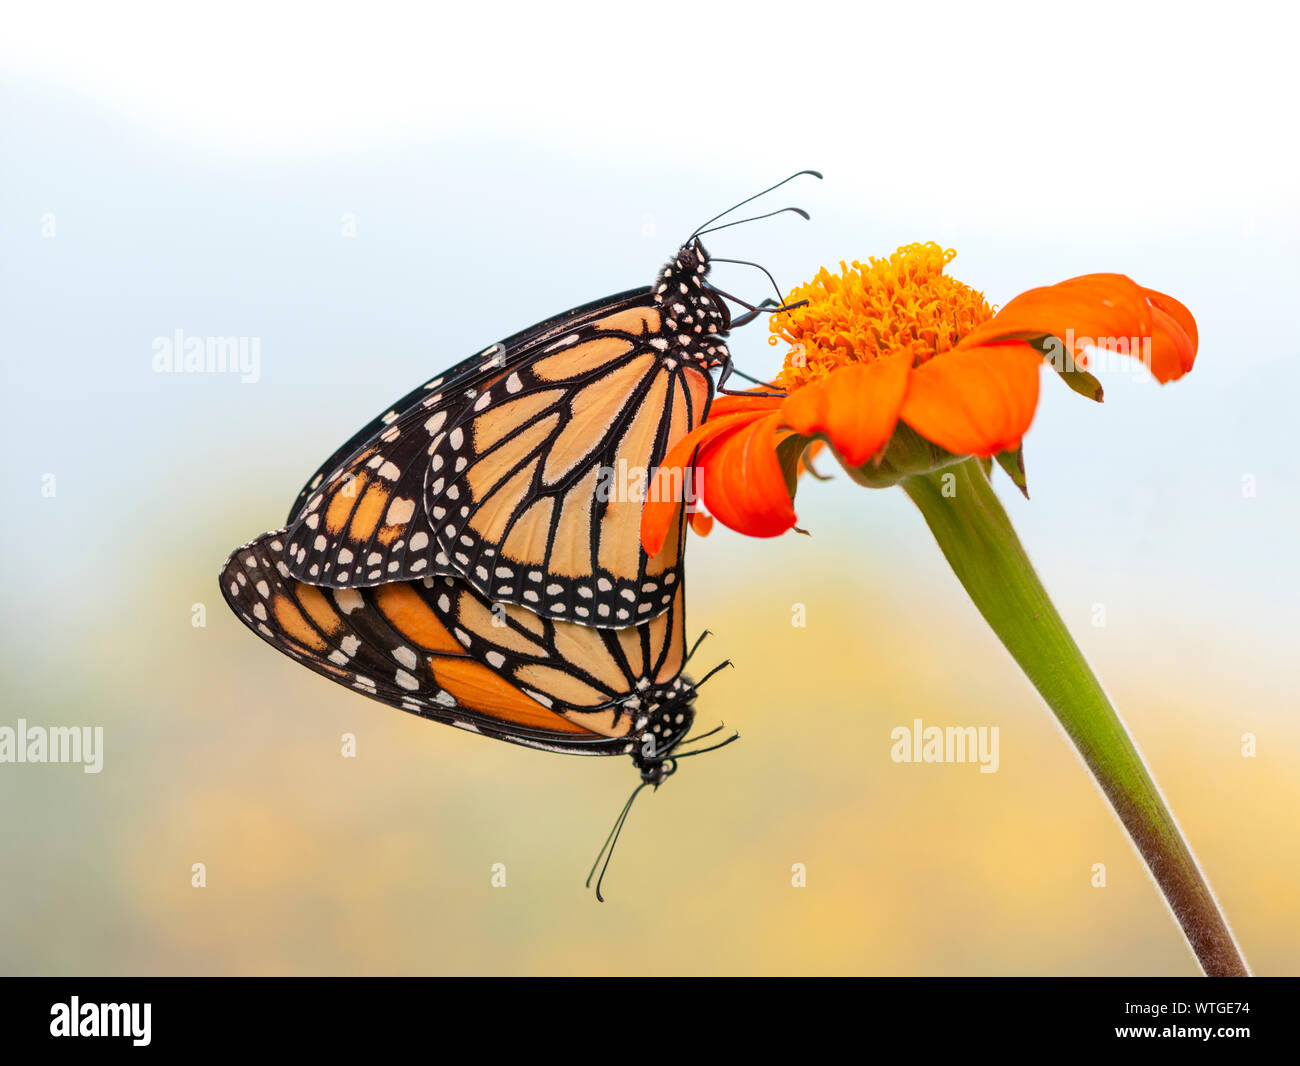 Pair (2) of monarch butterflies (Danaus plexippus) mating, while the male butterfly feeds on the nectar of a milkweed flower (asclepias tuberosa) Stock Photo